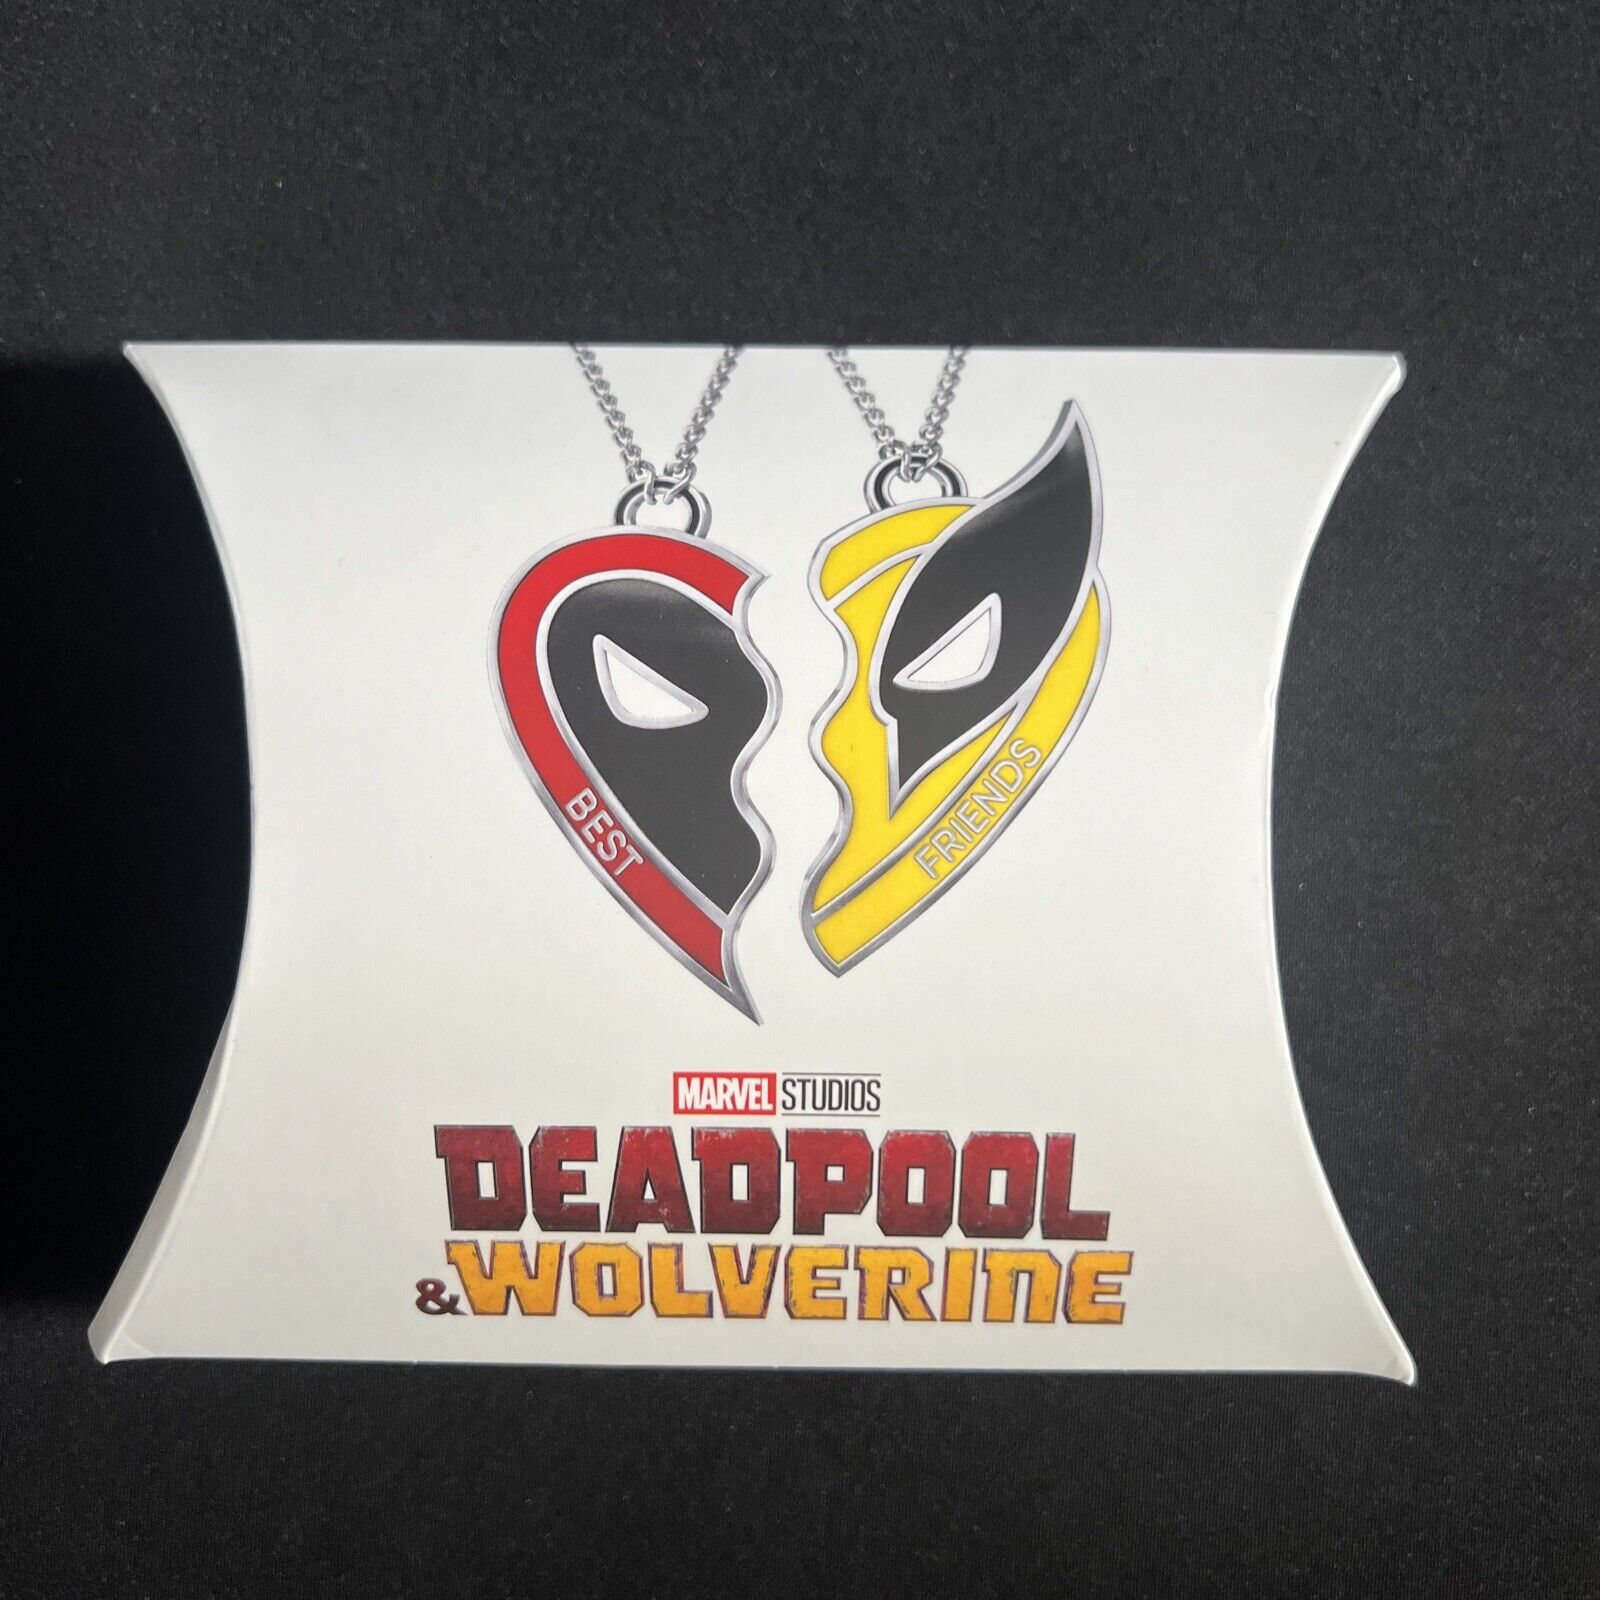 Deadpool & Wolverine Friendship Bracelets Dave & Busters Promo New OFFICIAL